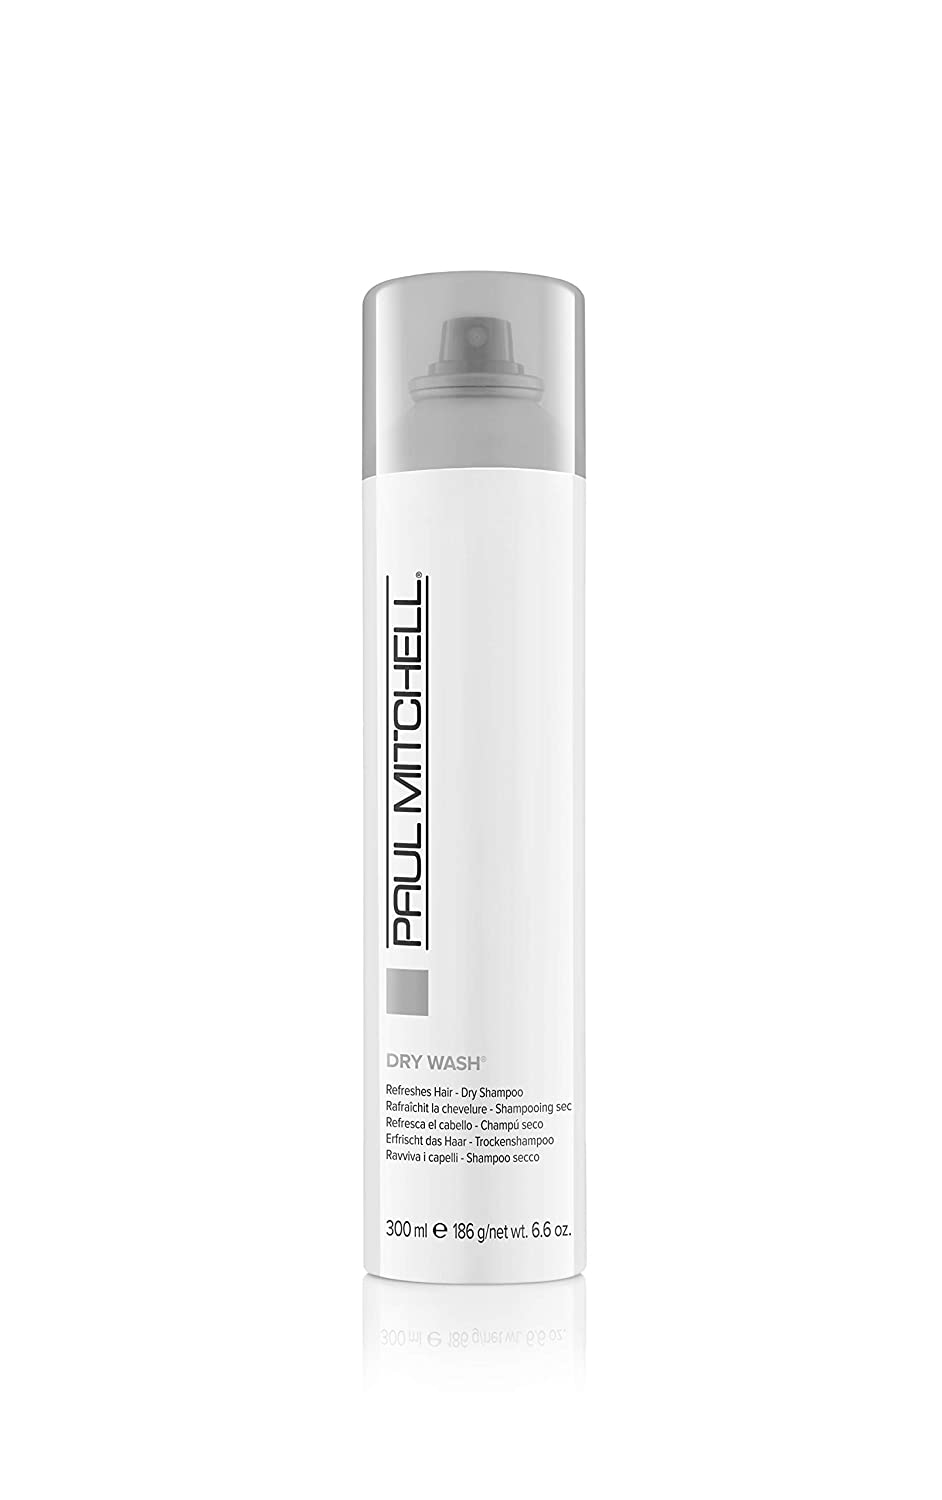 Paul Mitchell Express Dry, Dry Wash